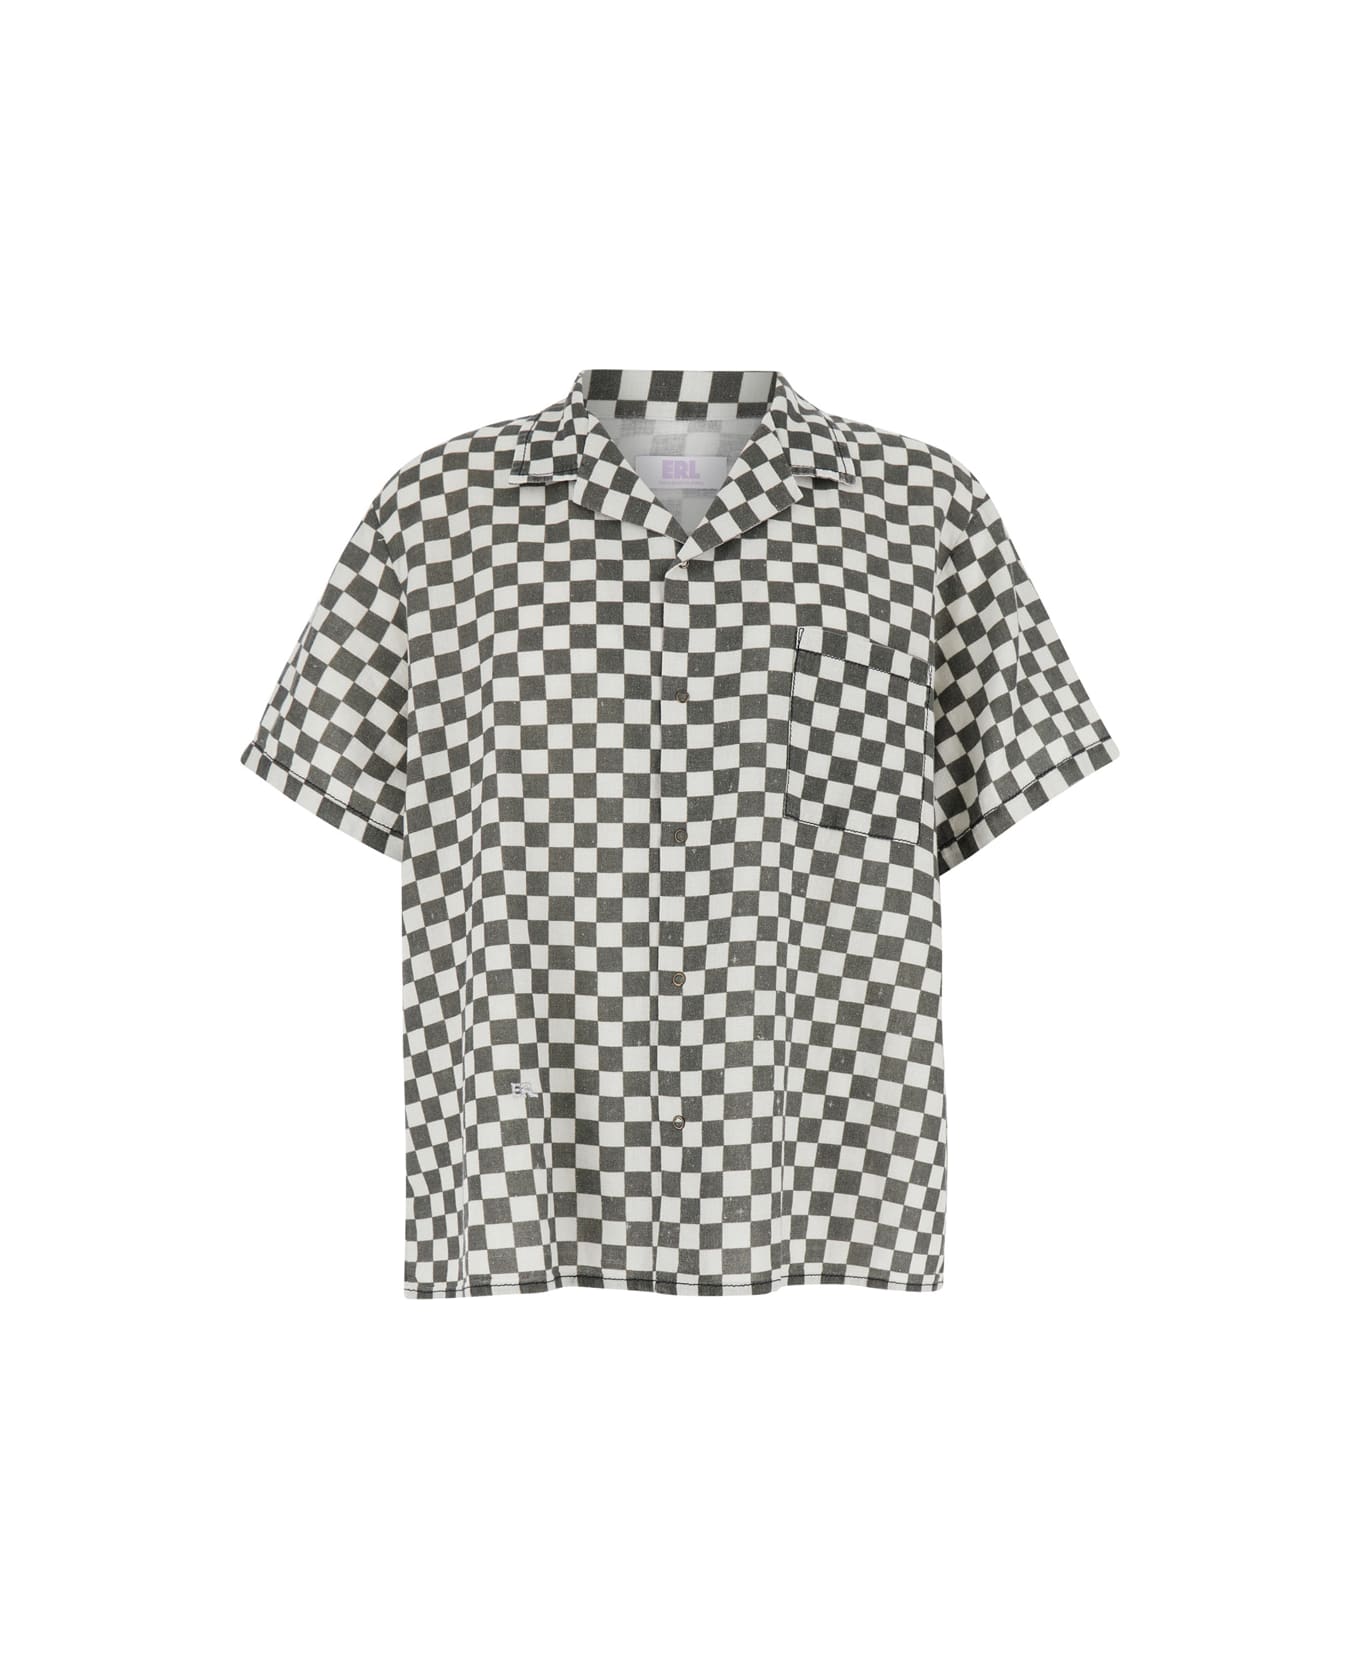 ERL Black And White Bowling Shirt With Check Motif In Cotton And Linen Man - Grey シャツ